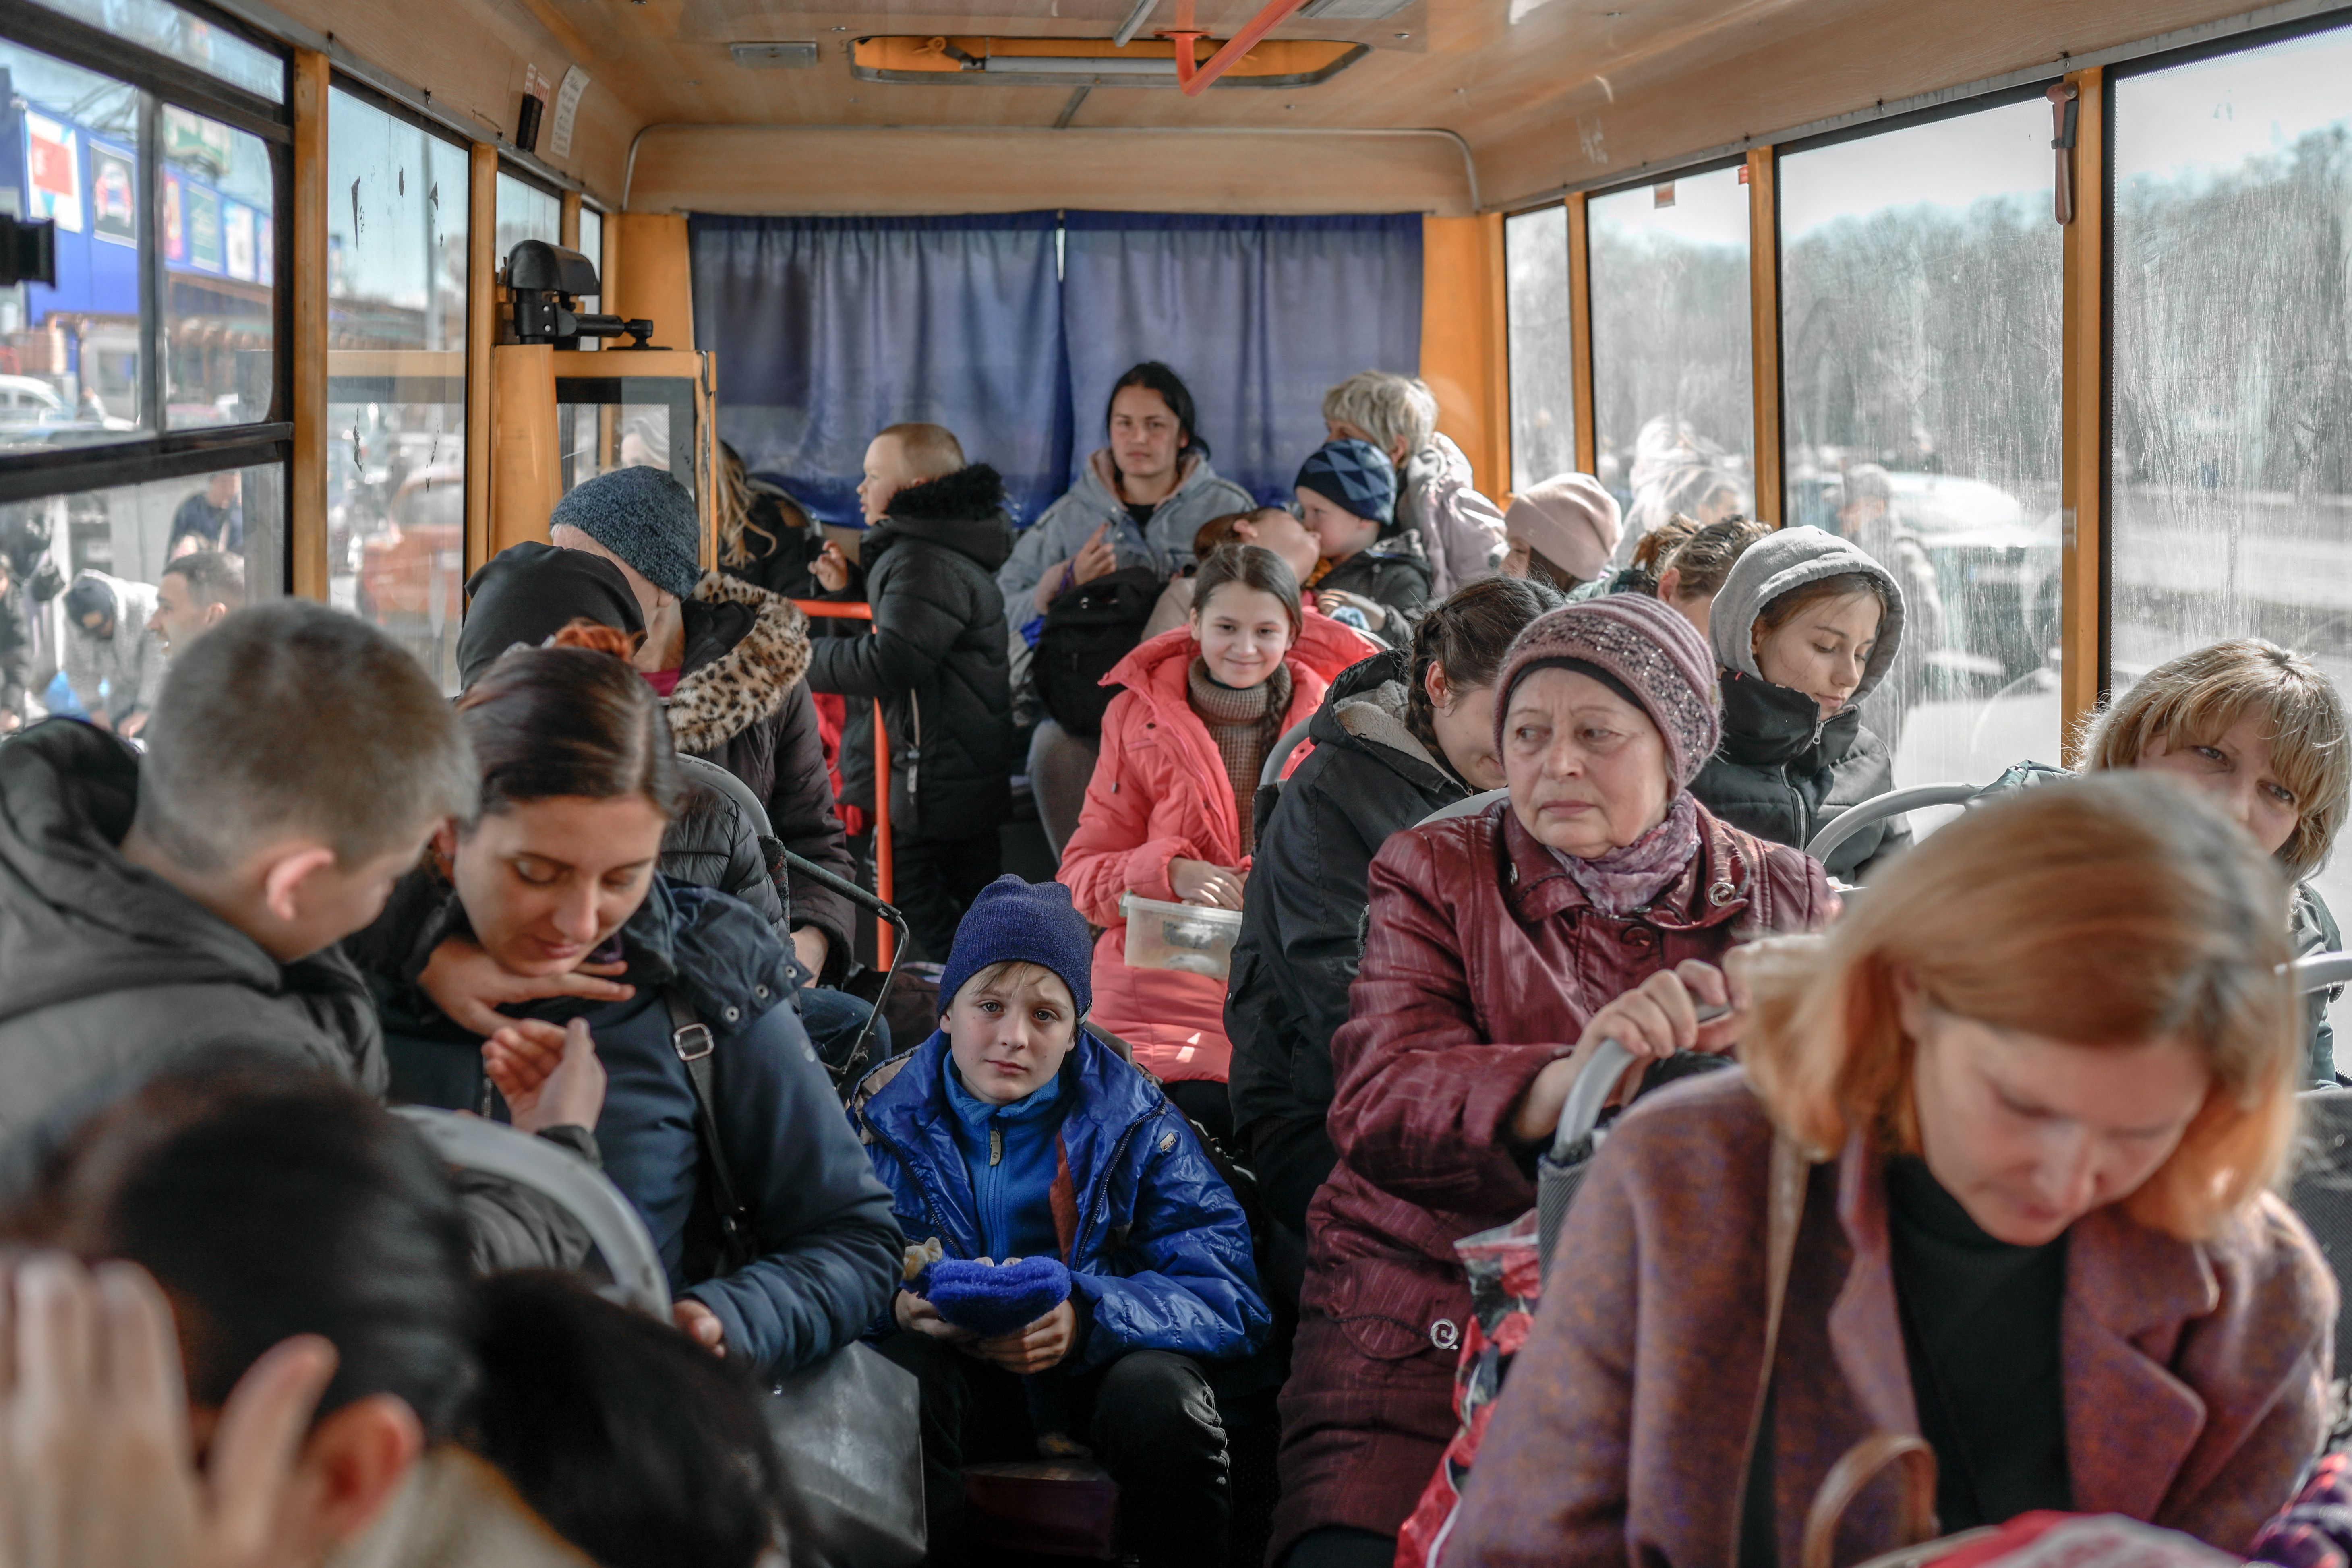 Arrivals at a center for displaced persons in Zaporizhzhia, Ukraine, on April 6.